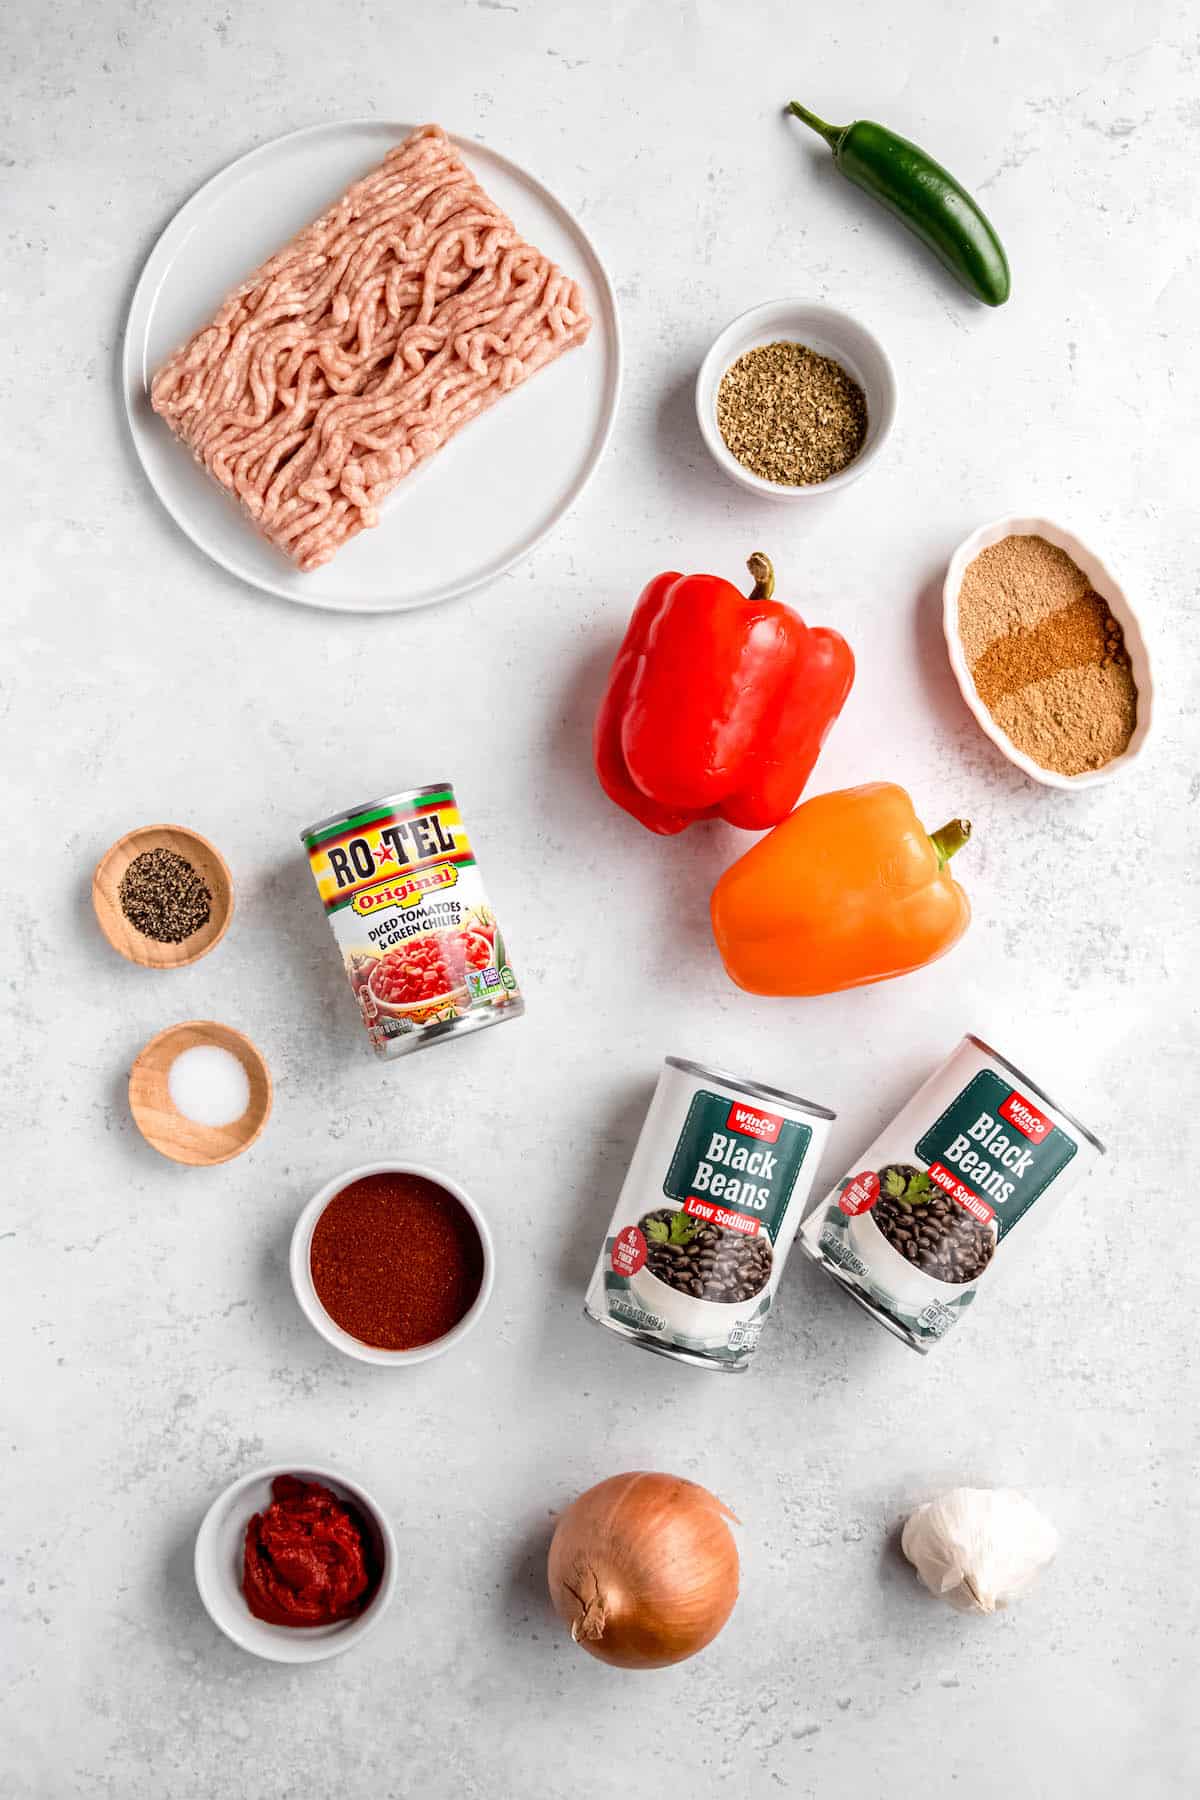 ingredients needed to make spicy black bean chicken chili measured out into bowls on a white table.